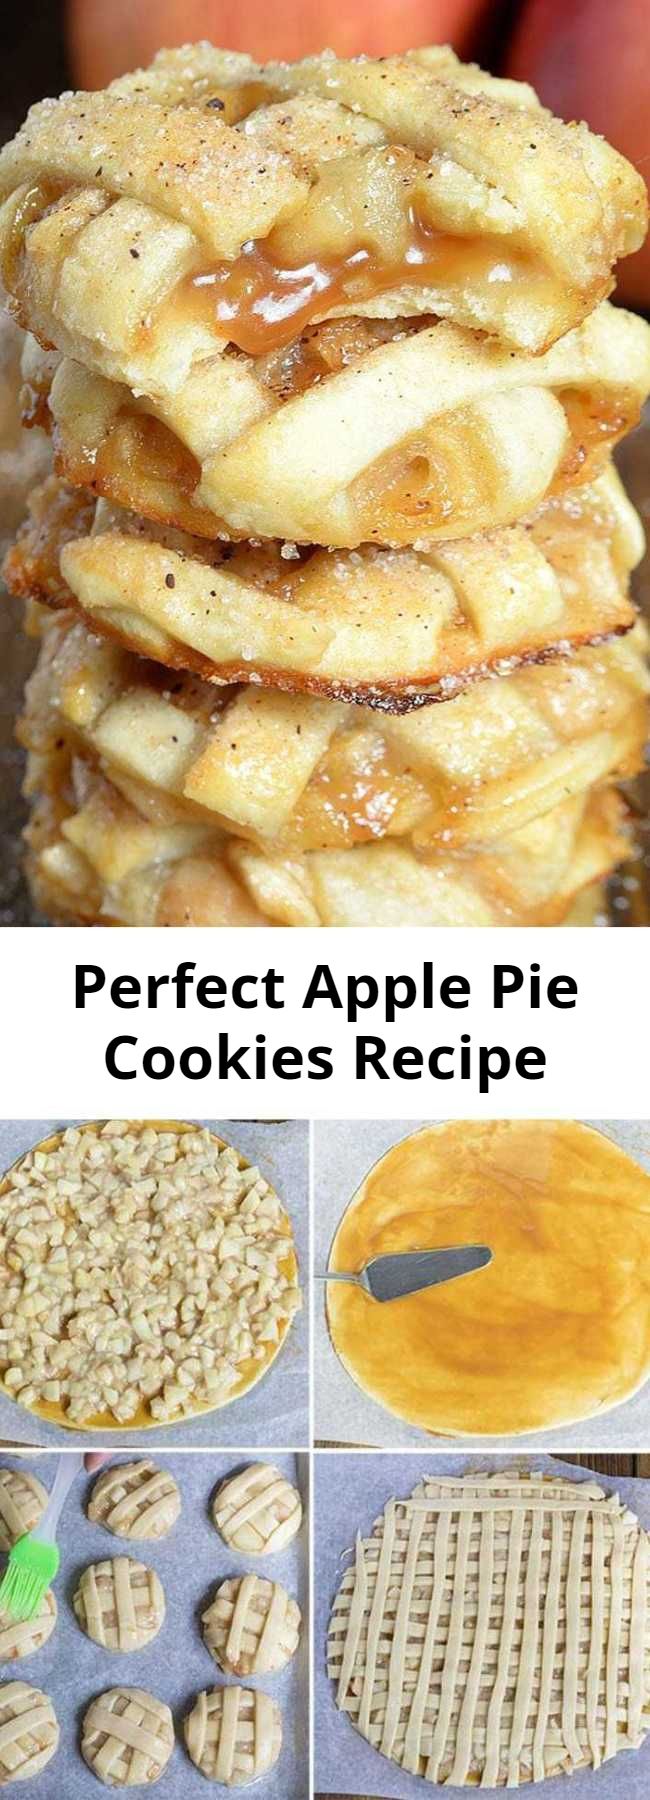 Perfect Apple Pie Cookies Recipe - Apple Pie Cookies – sticky and chewy, bite-sized caramel apple pies. Sometimes the regular old apple pie recipe is just too much dessert to handle. These gooey bites bring you the best of both worlds: the fruity-caramel flavor of traditional pie, with all of the convenience of a simple cookie recipe! (No fork required!!!)